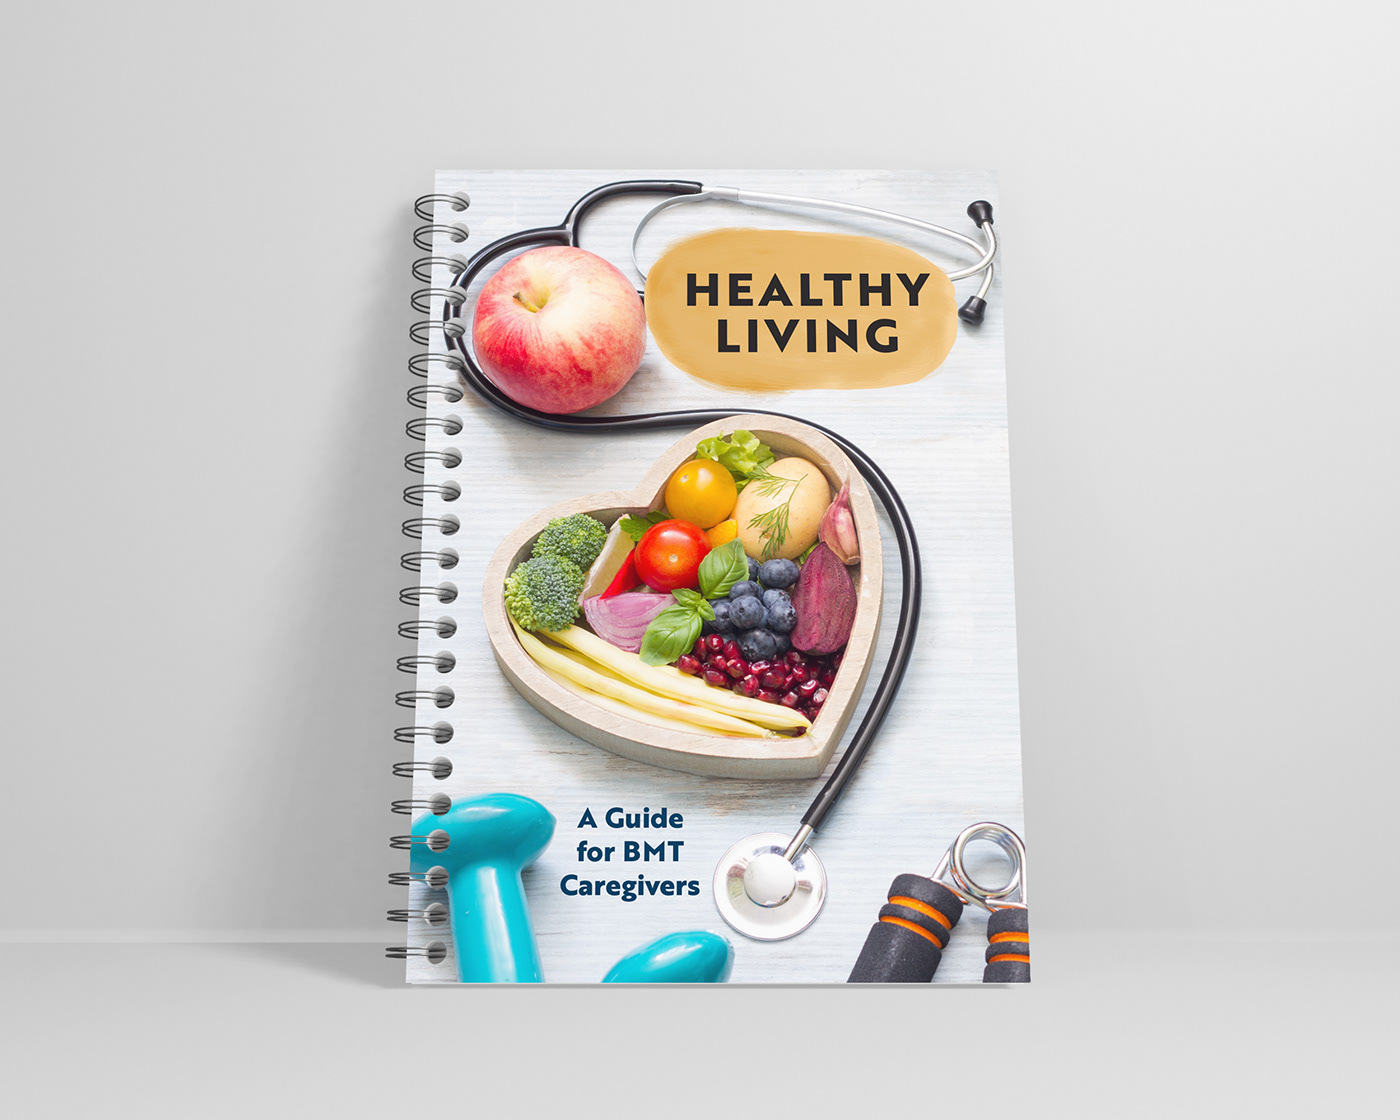 Cover of a book with title Healthy Living